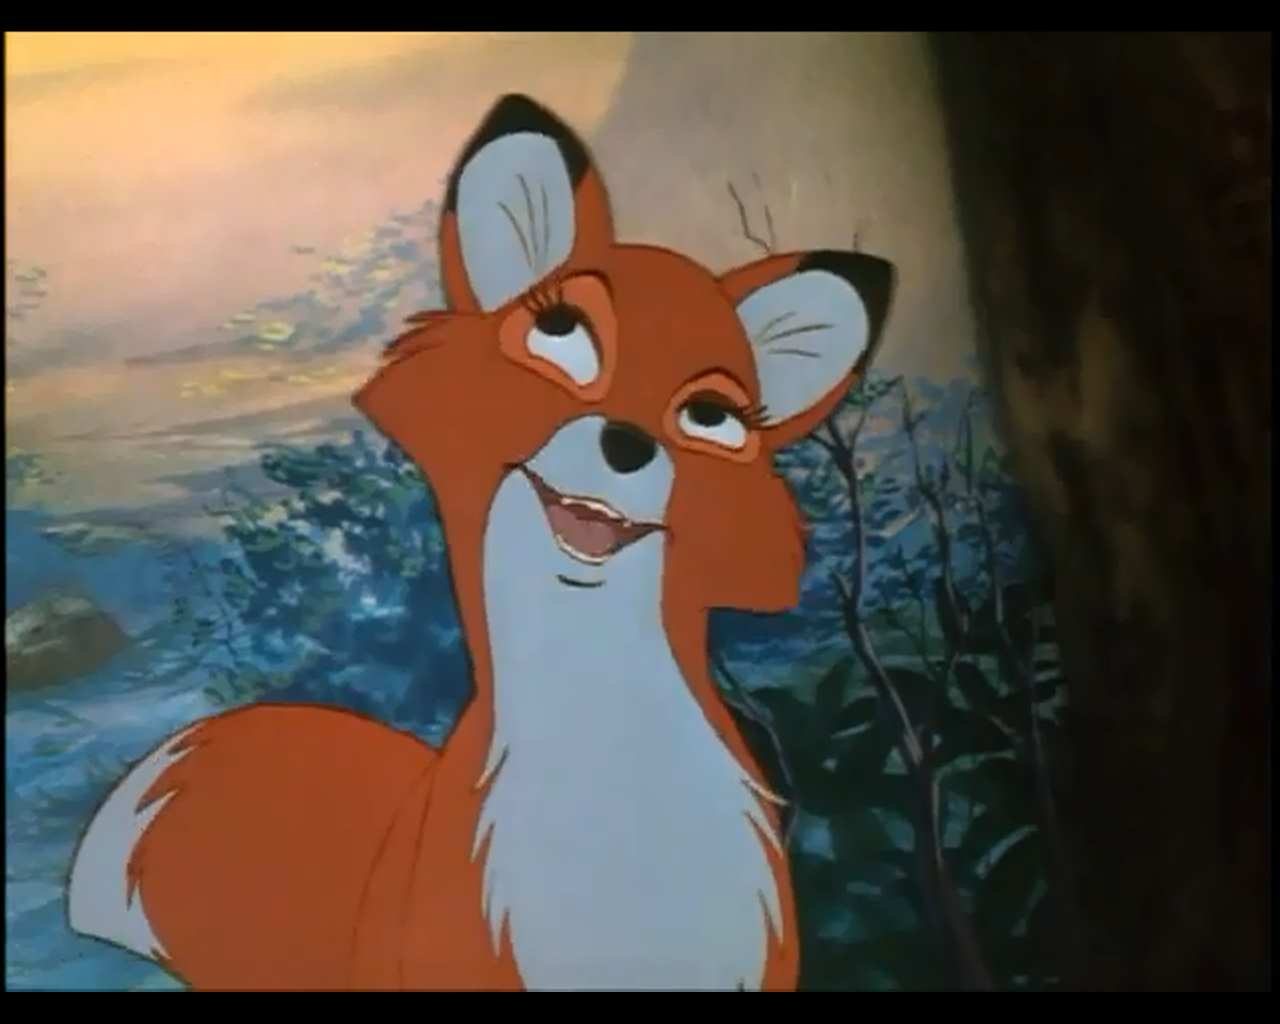 Vixey-The Fox and the Hound_image > The Cinema Warehouse.